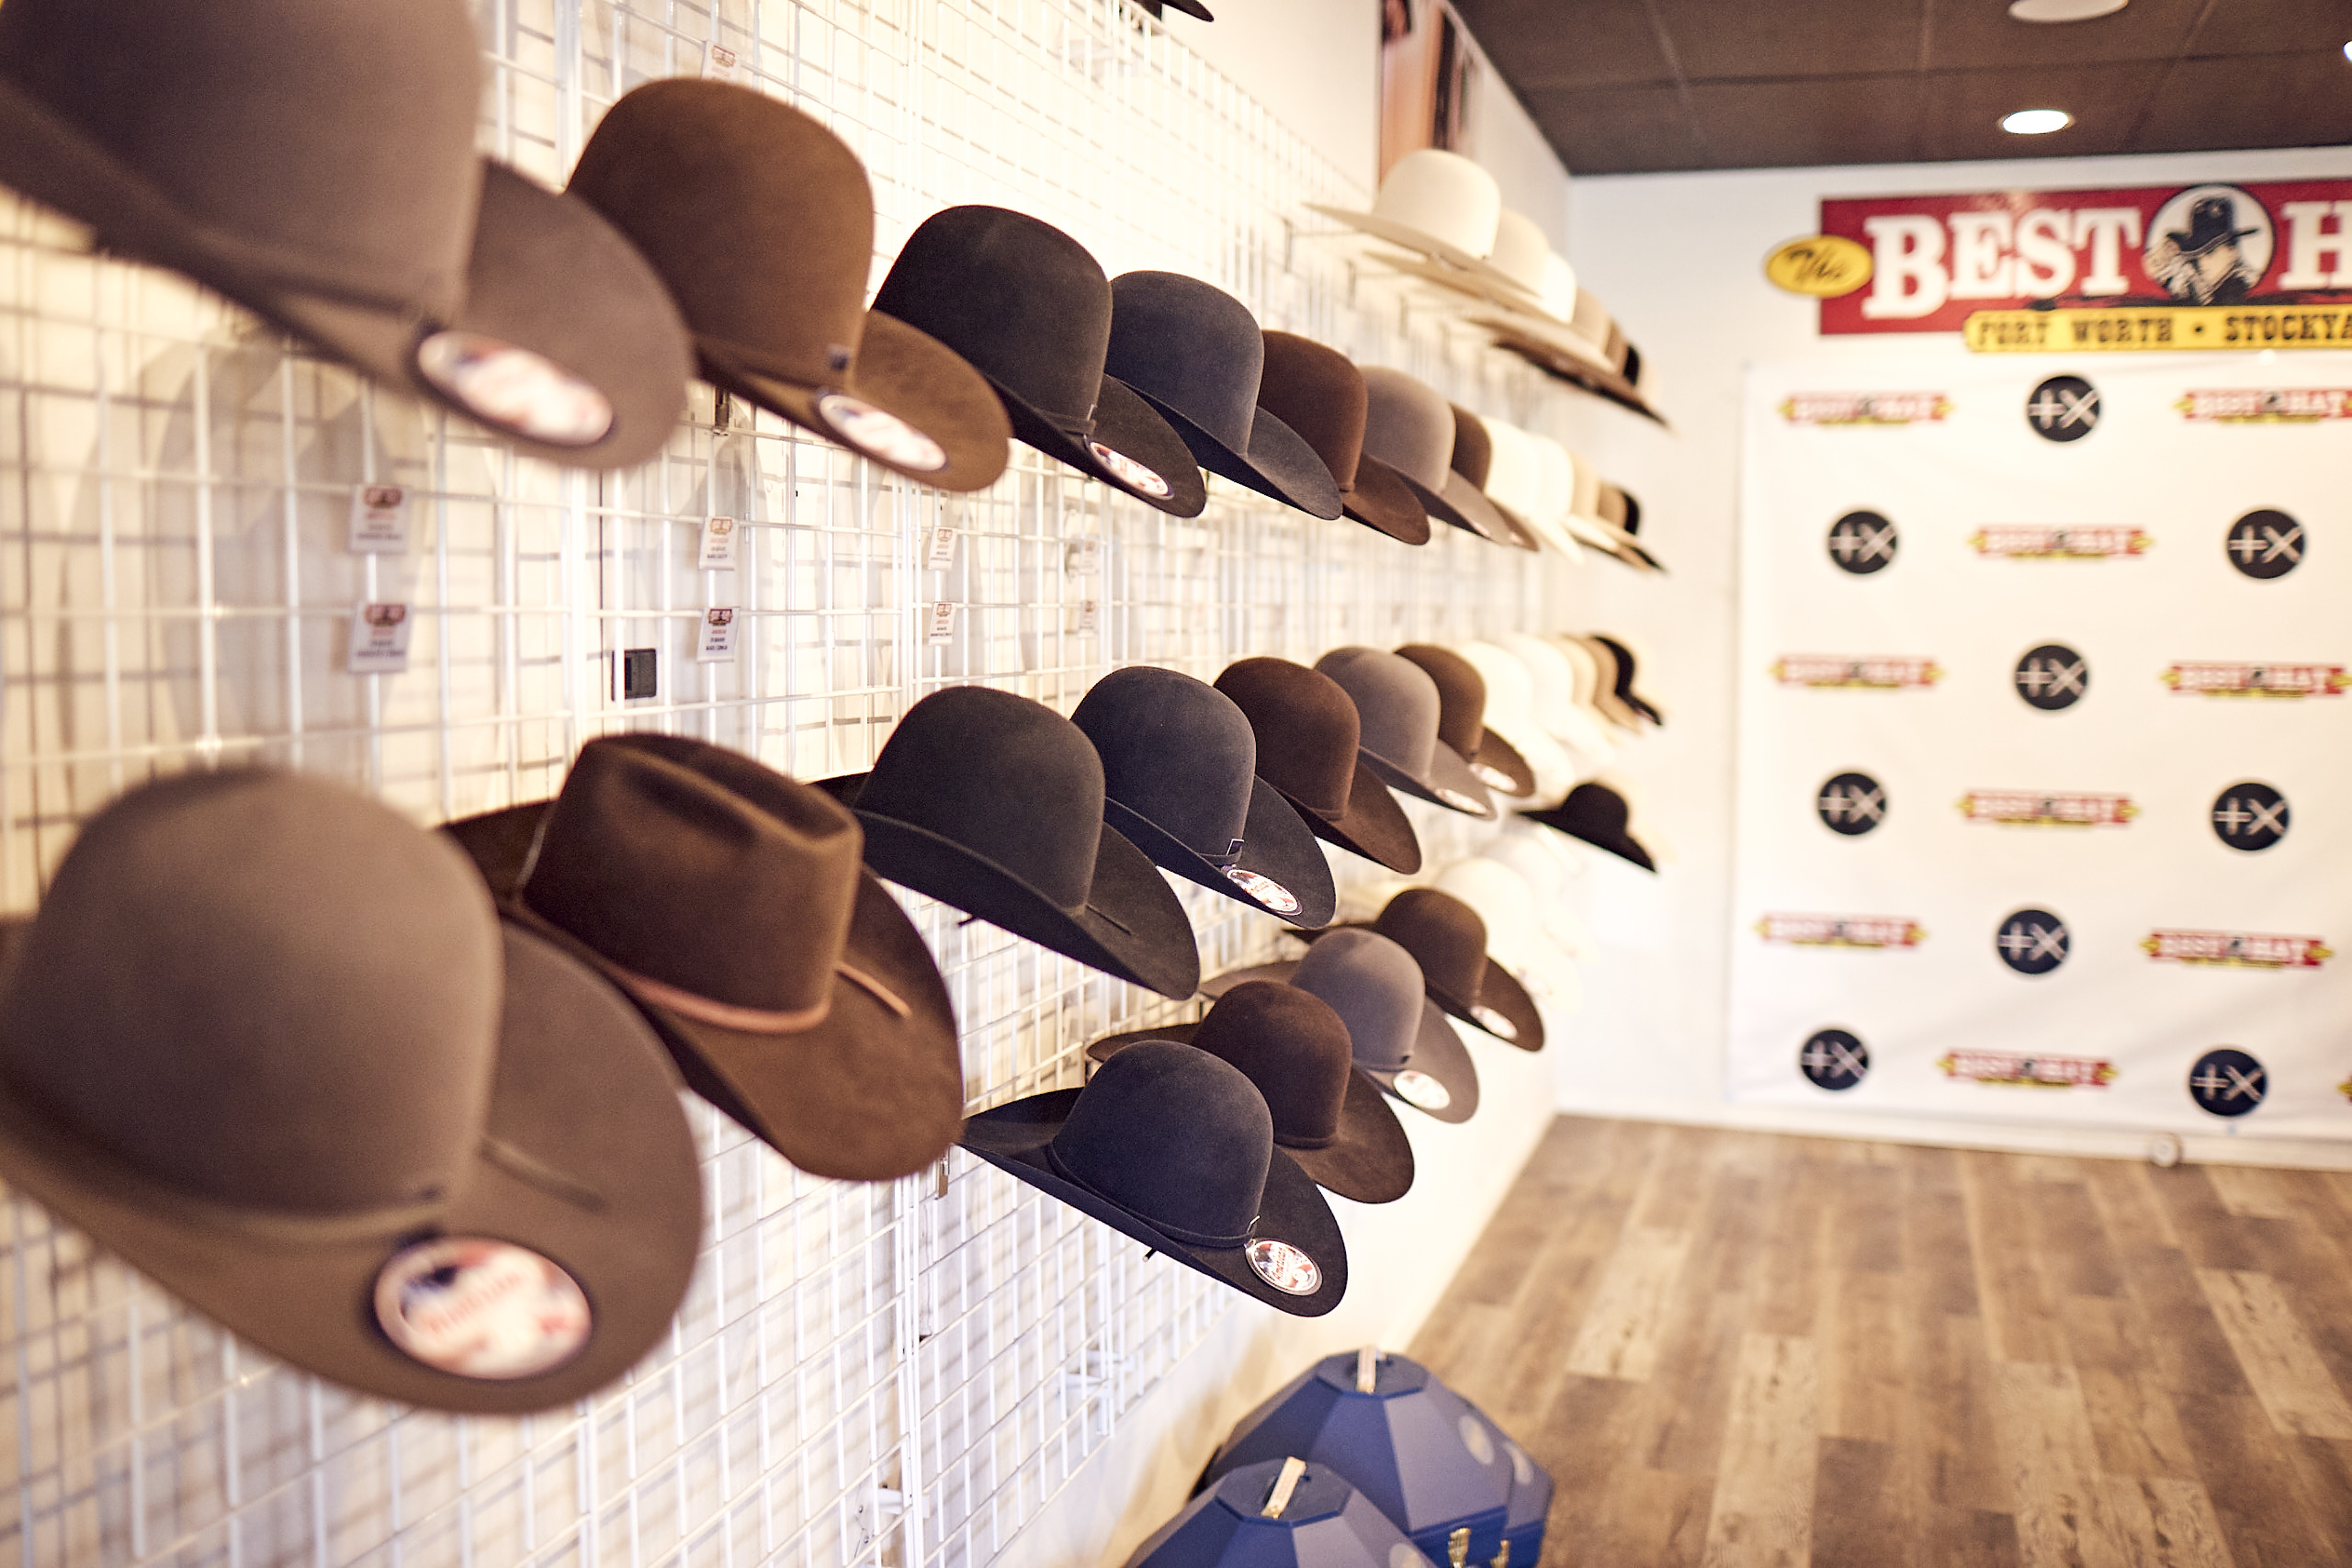 The Best Hat Store Is Coming To Cowboy Christmas